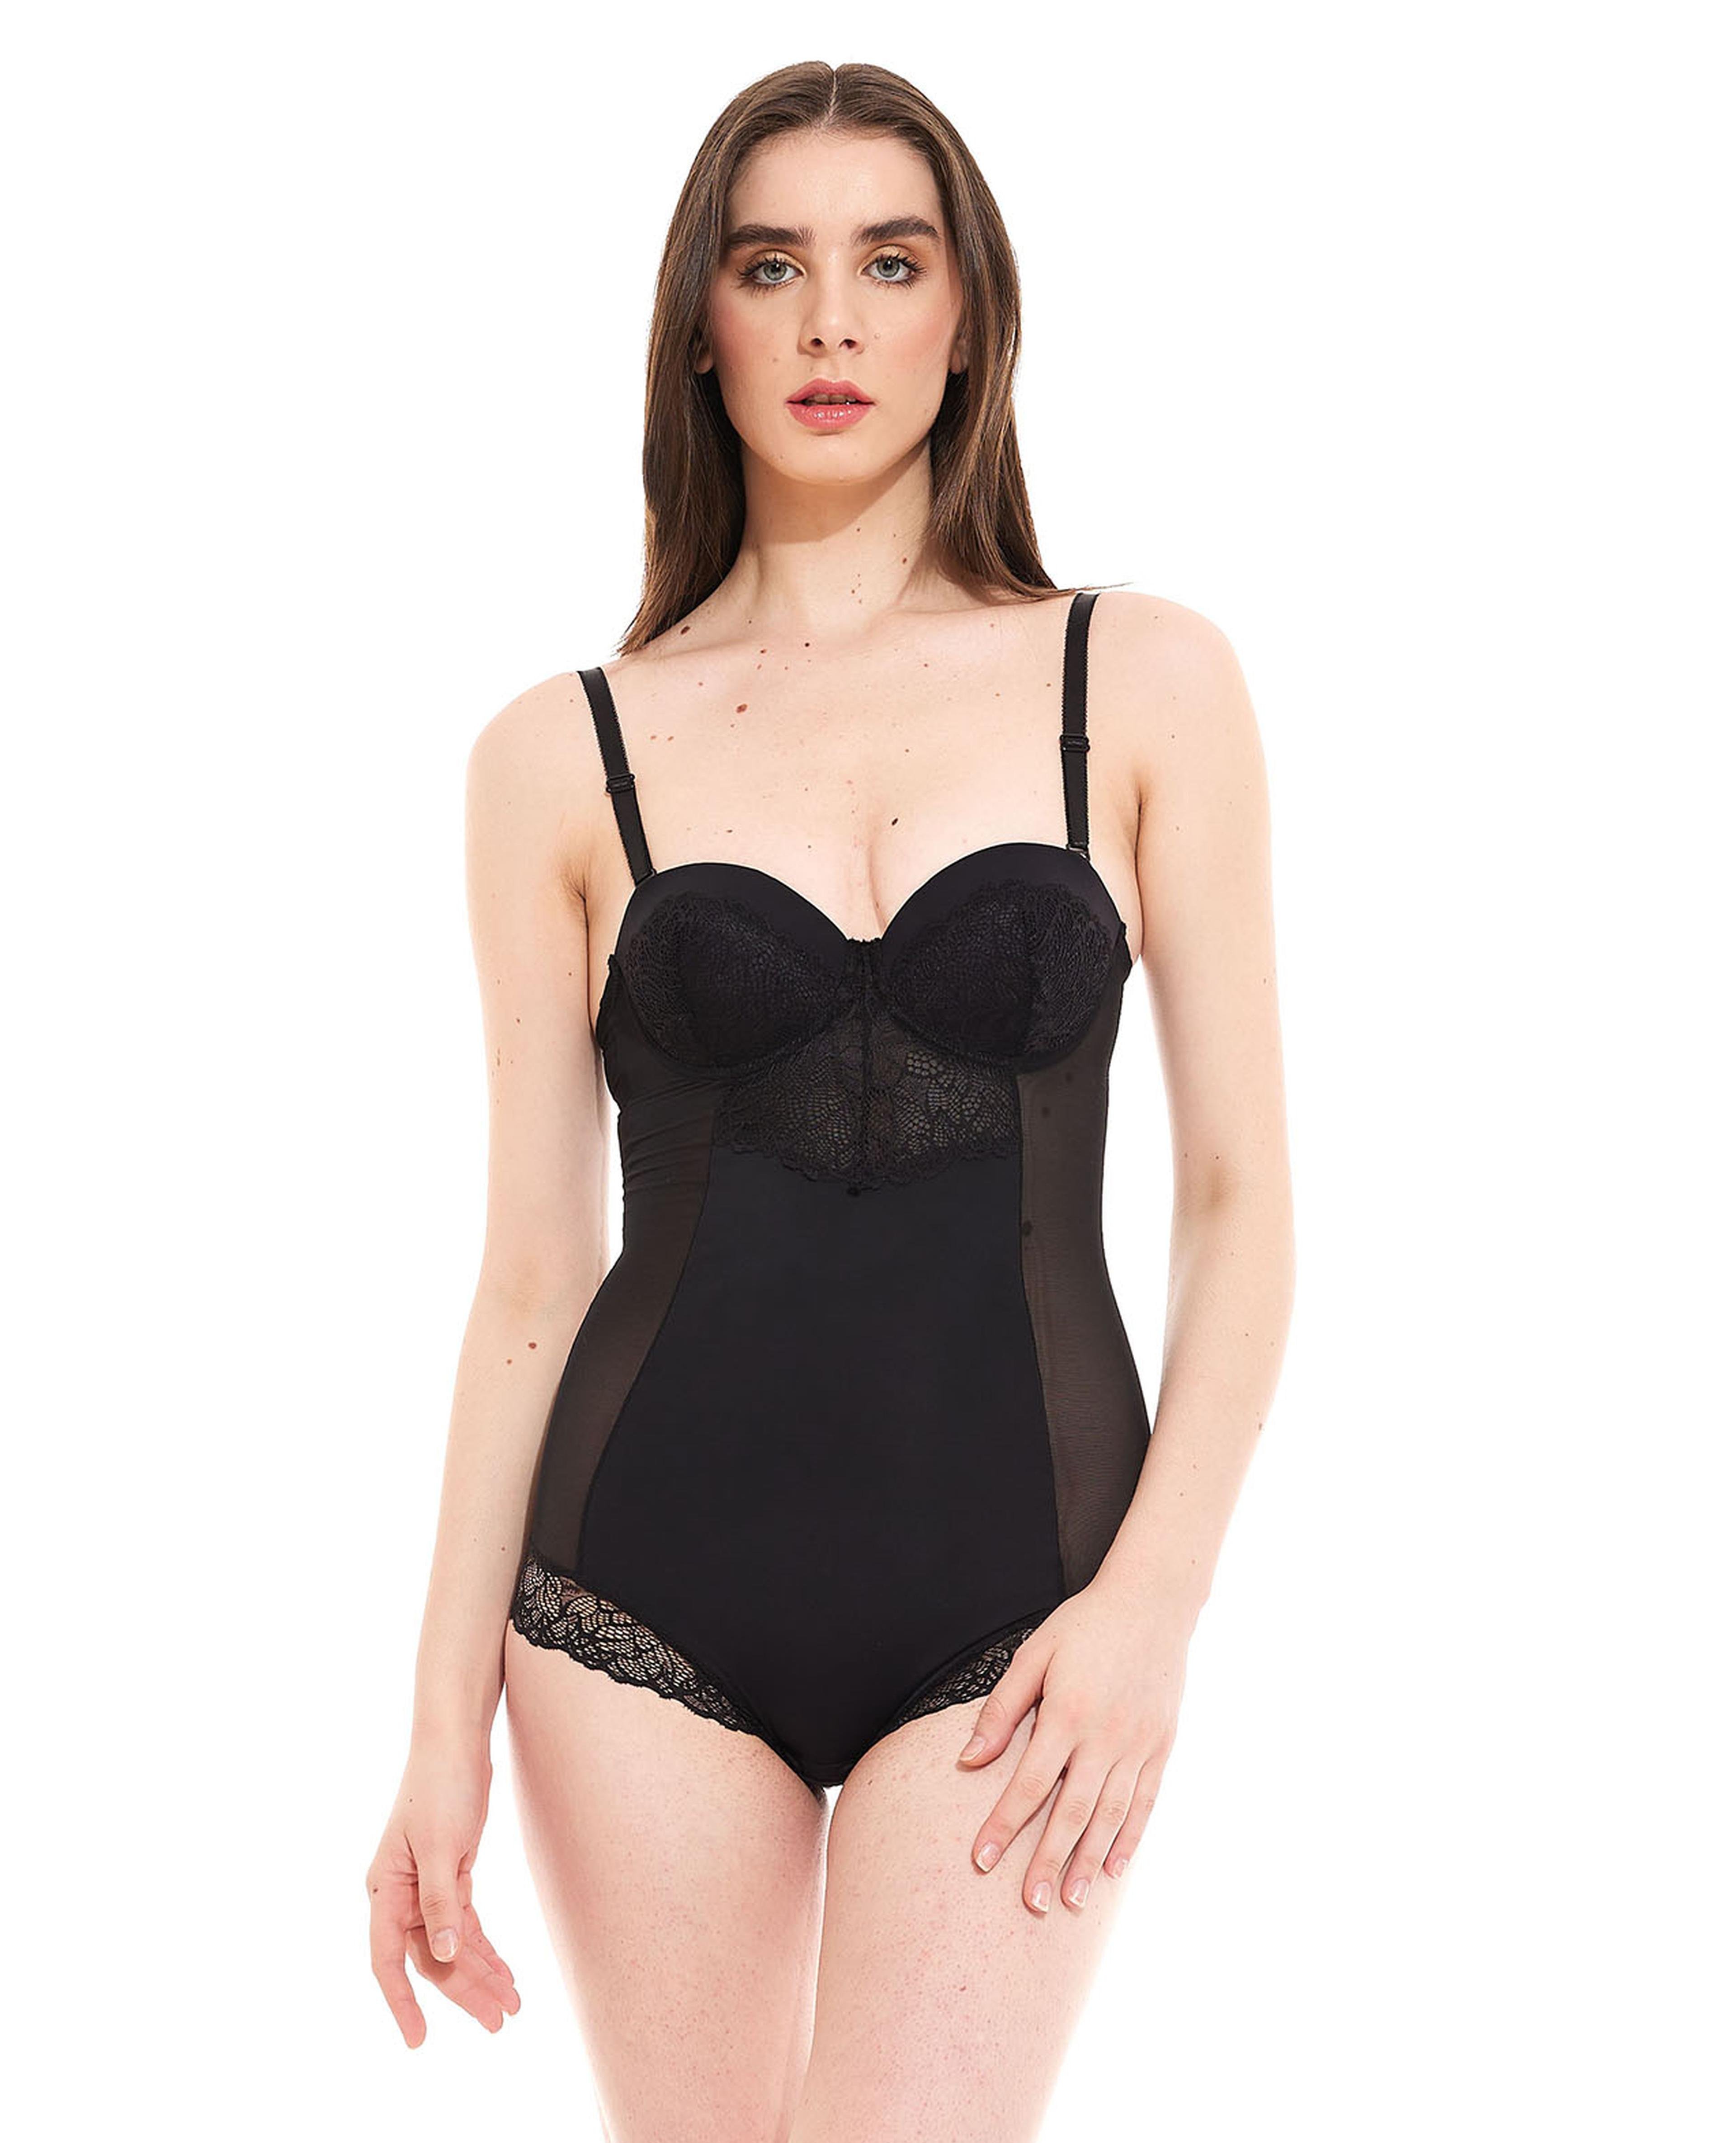 Shop Shapewear from Women's Intimates & Sleepwear Online at Best Prices